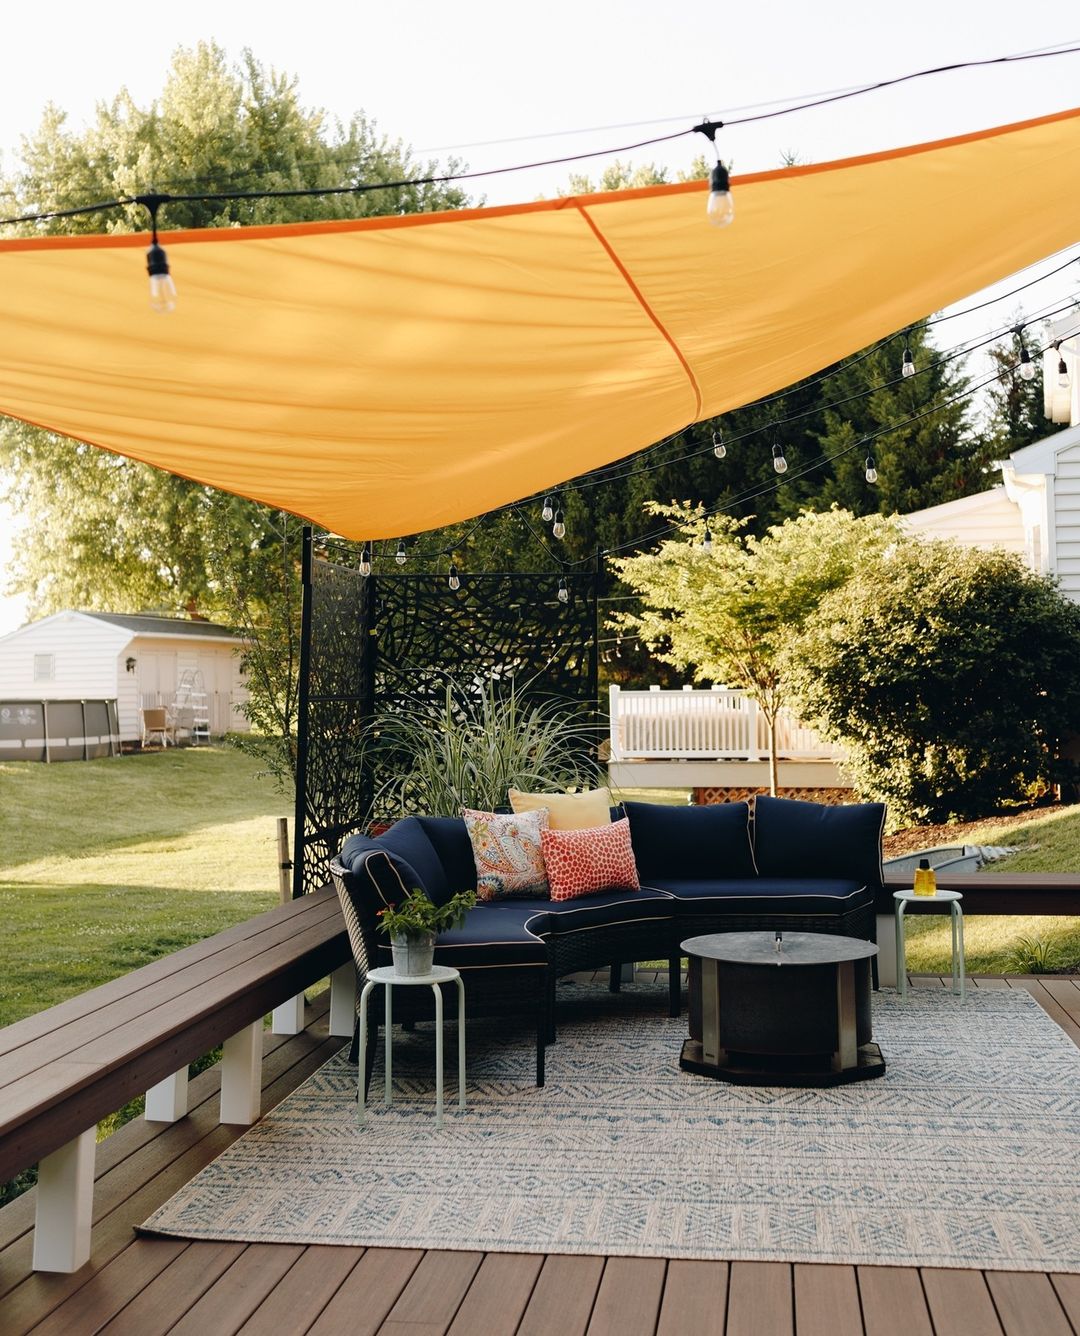 Sail shade above an outdoor seating set in a spacious back yard. Photo by Instagram user @brookside.brothers.